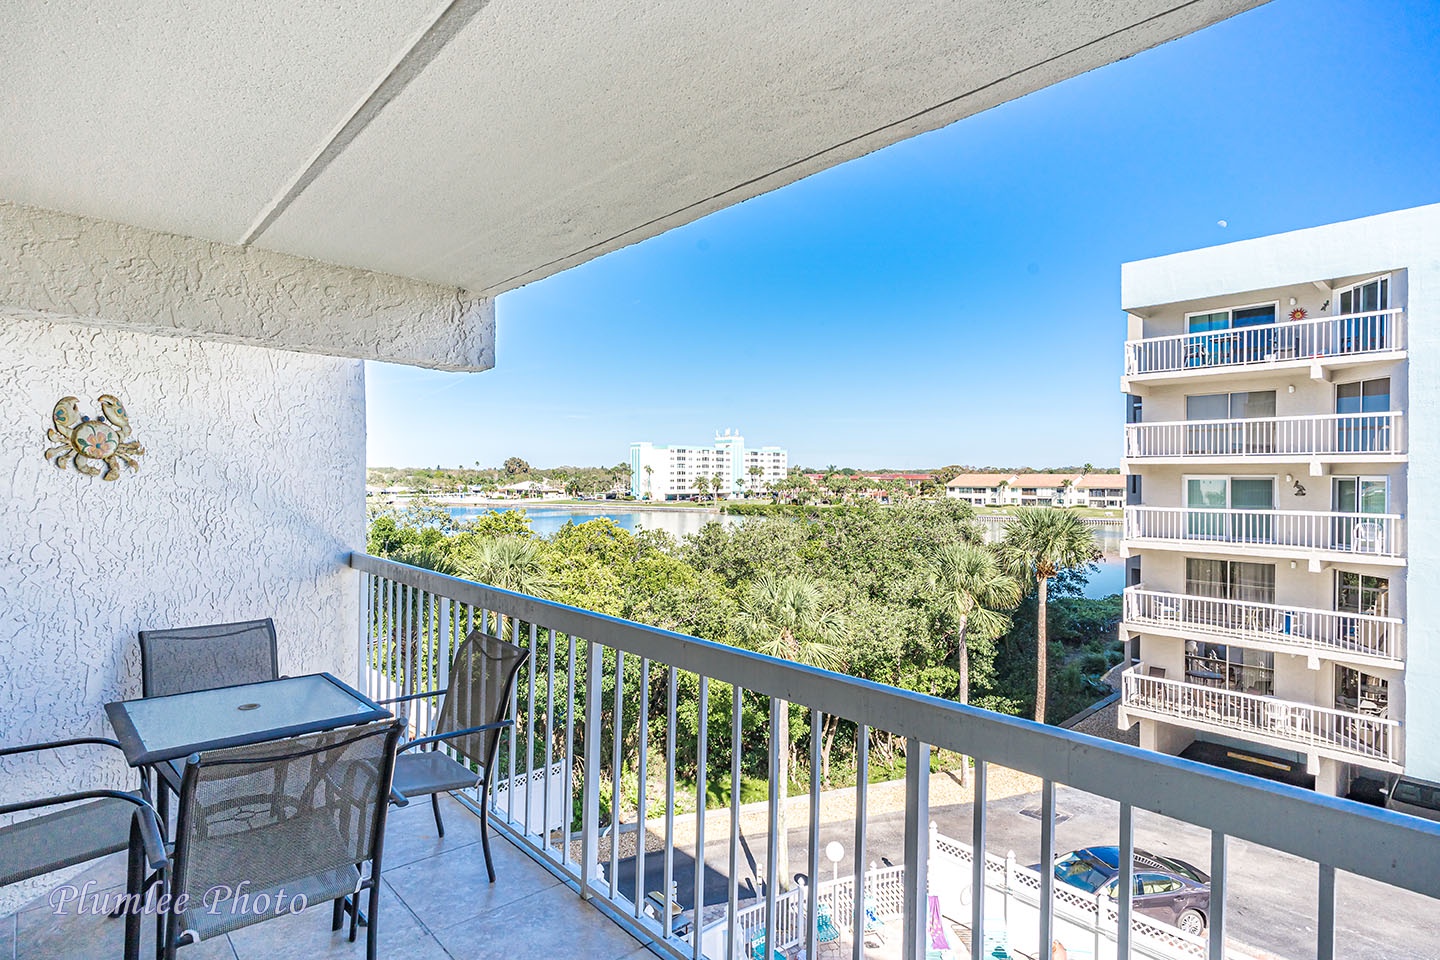 Private balcony with view of the Intracoastal Waterway.